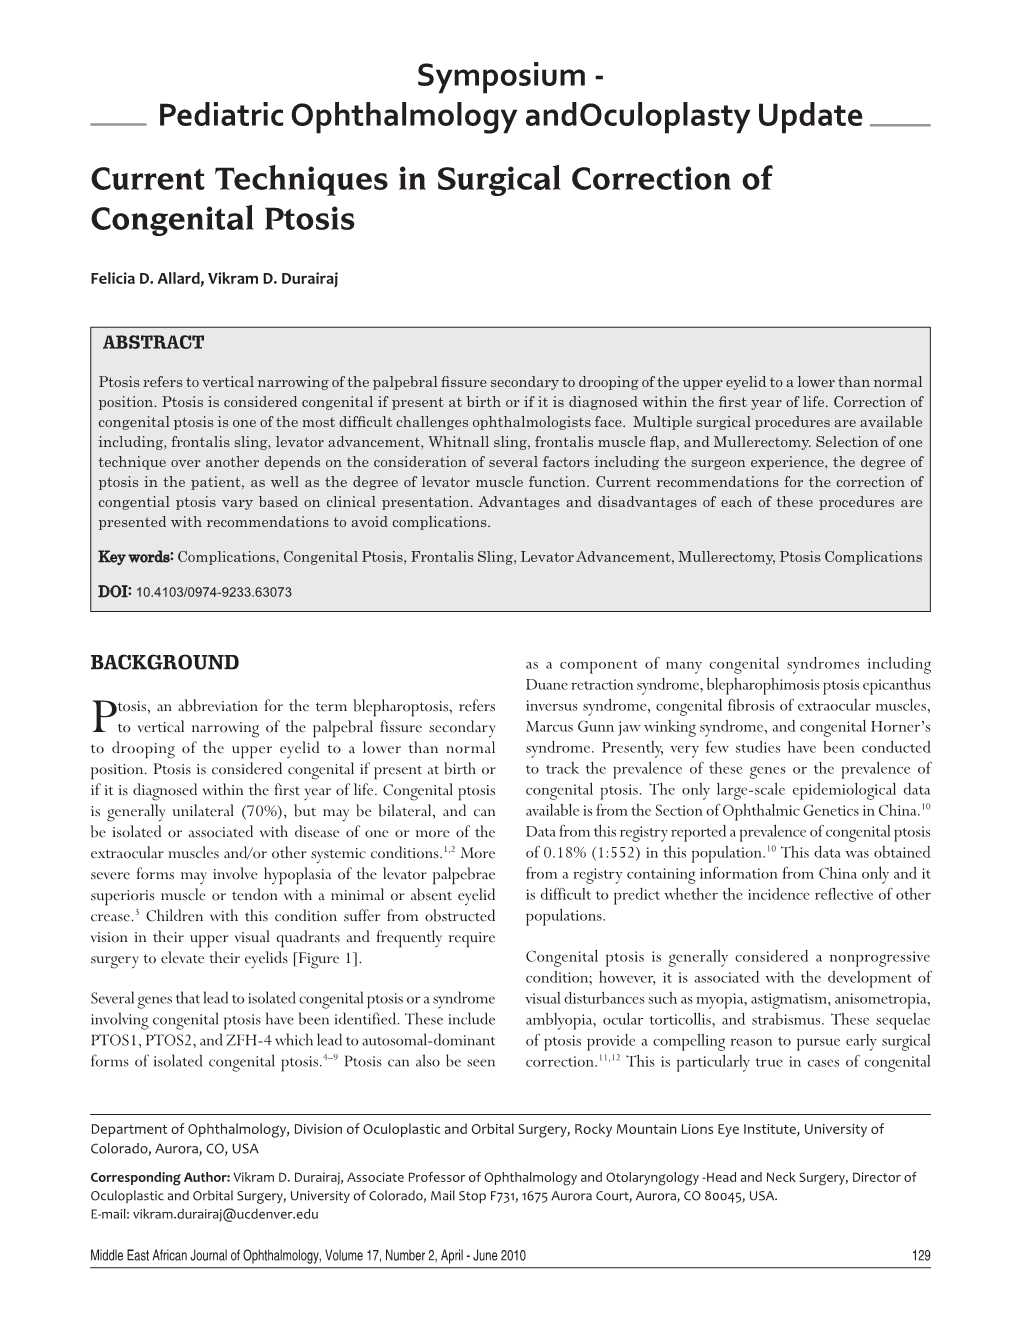 Current Techniques in Surgical Correction of Congenital Ptosis Symposium